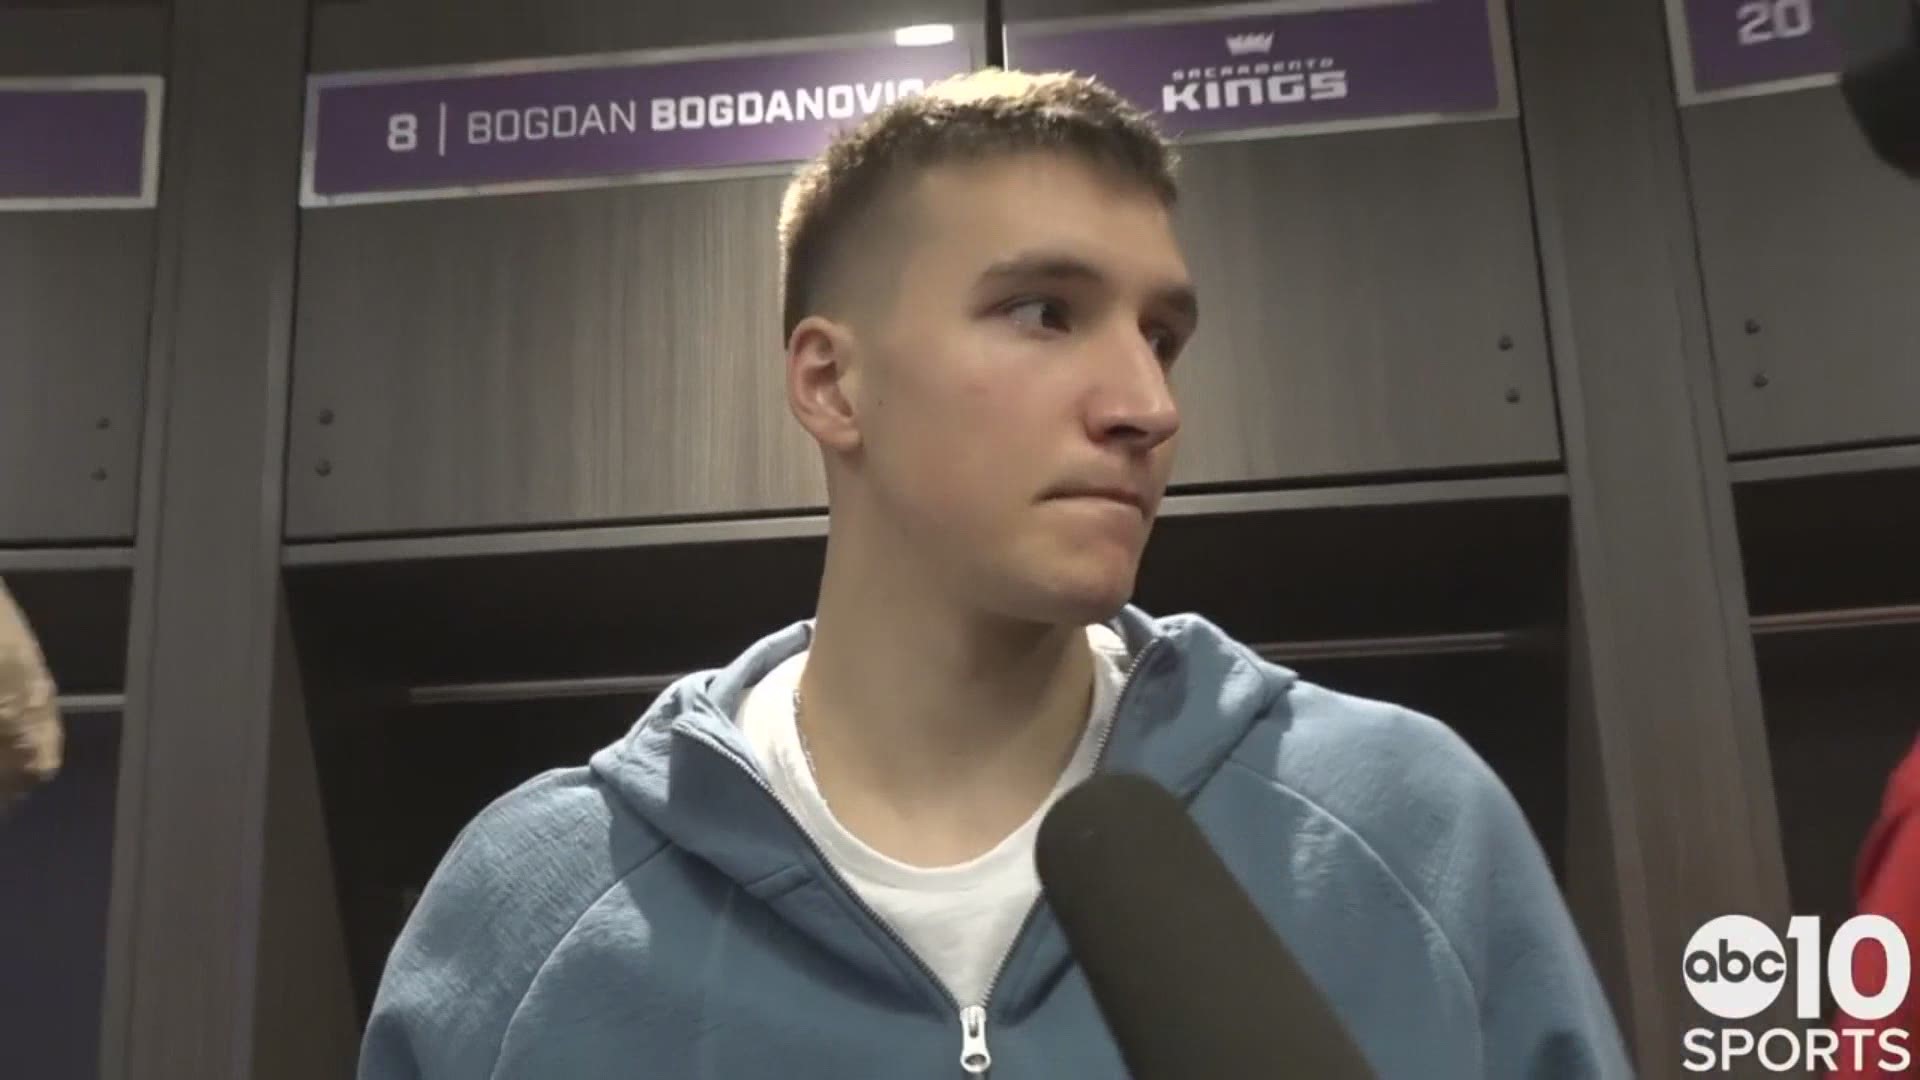 Following the Kings’ 118-111 loss to the Charlotte Hornets, to fall to 0-5 to start the season, Bogdan Bogdanovic tries to figure out his own struggles on the court.